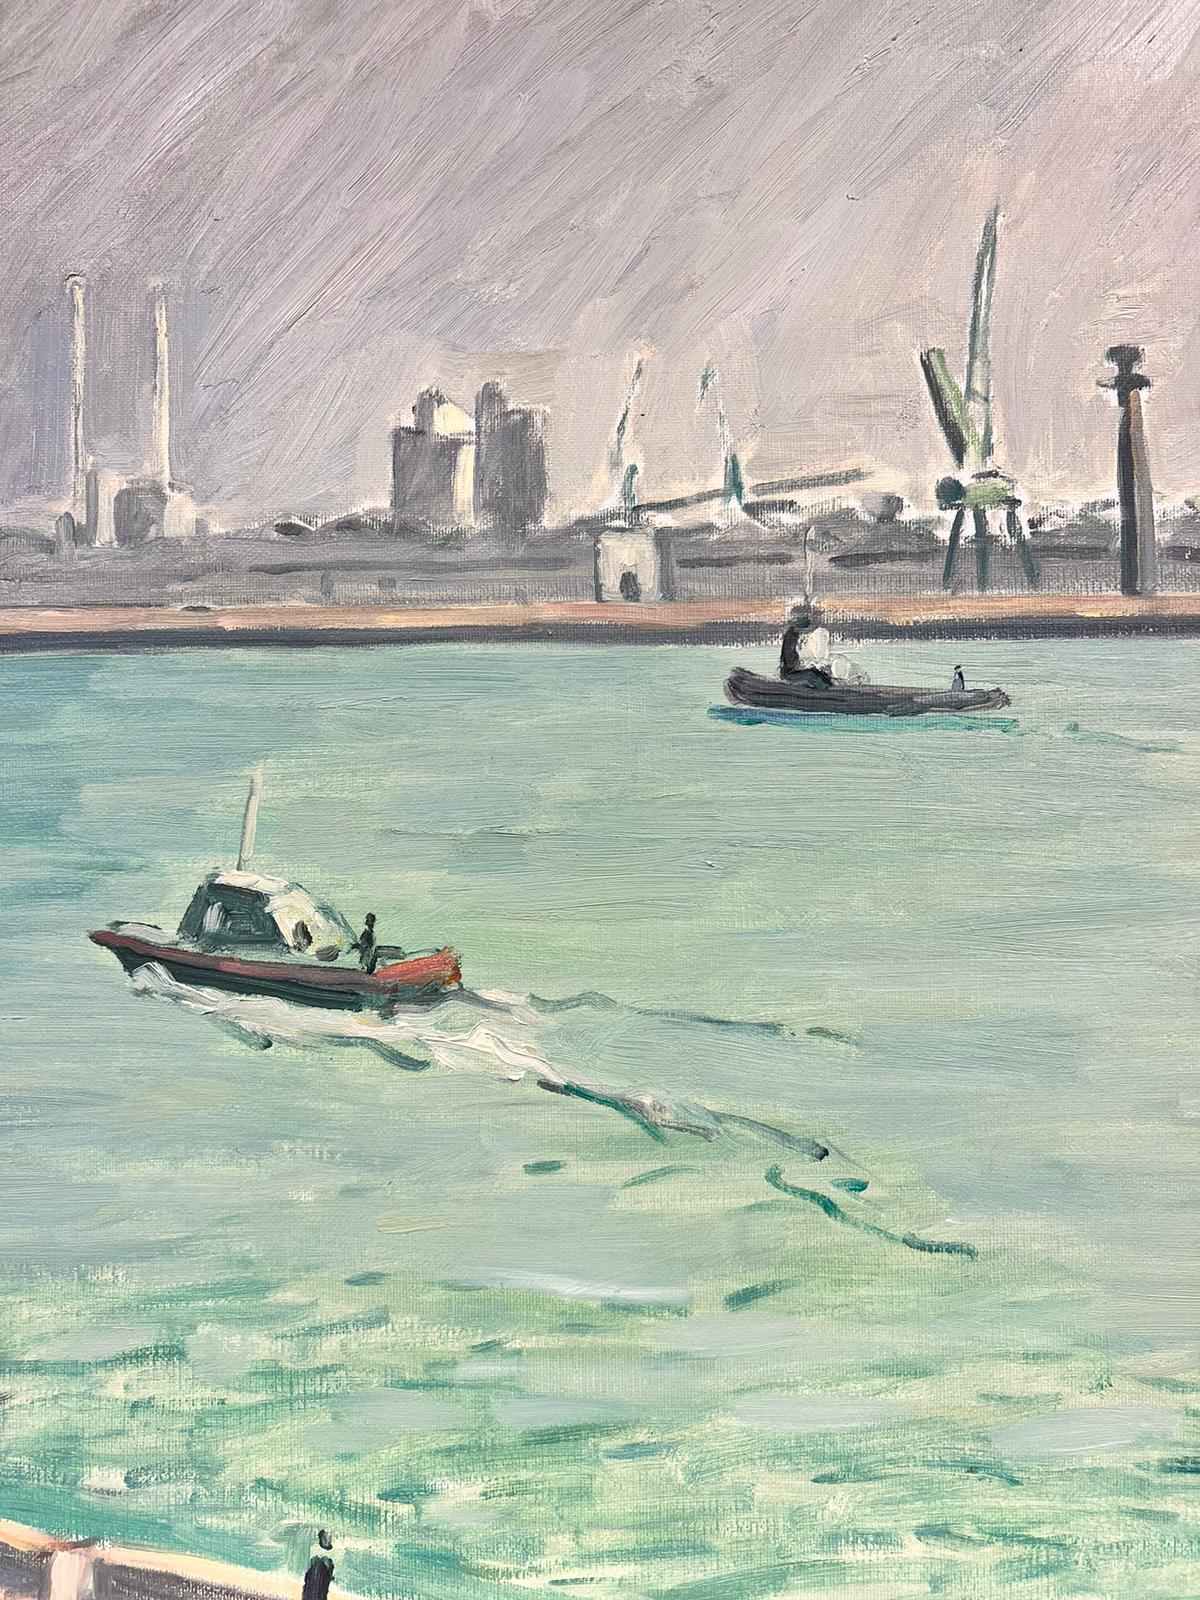 The Port
by Guy Pichon (French 1933-2007)
oil on canvas, unframed
signed 
canvas: 21 x 26 inches

provenance: private collection, France 
The painting is in very good and presentable condition.
